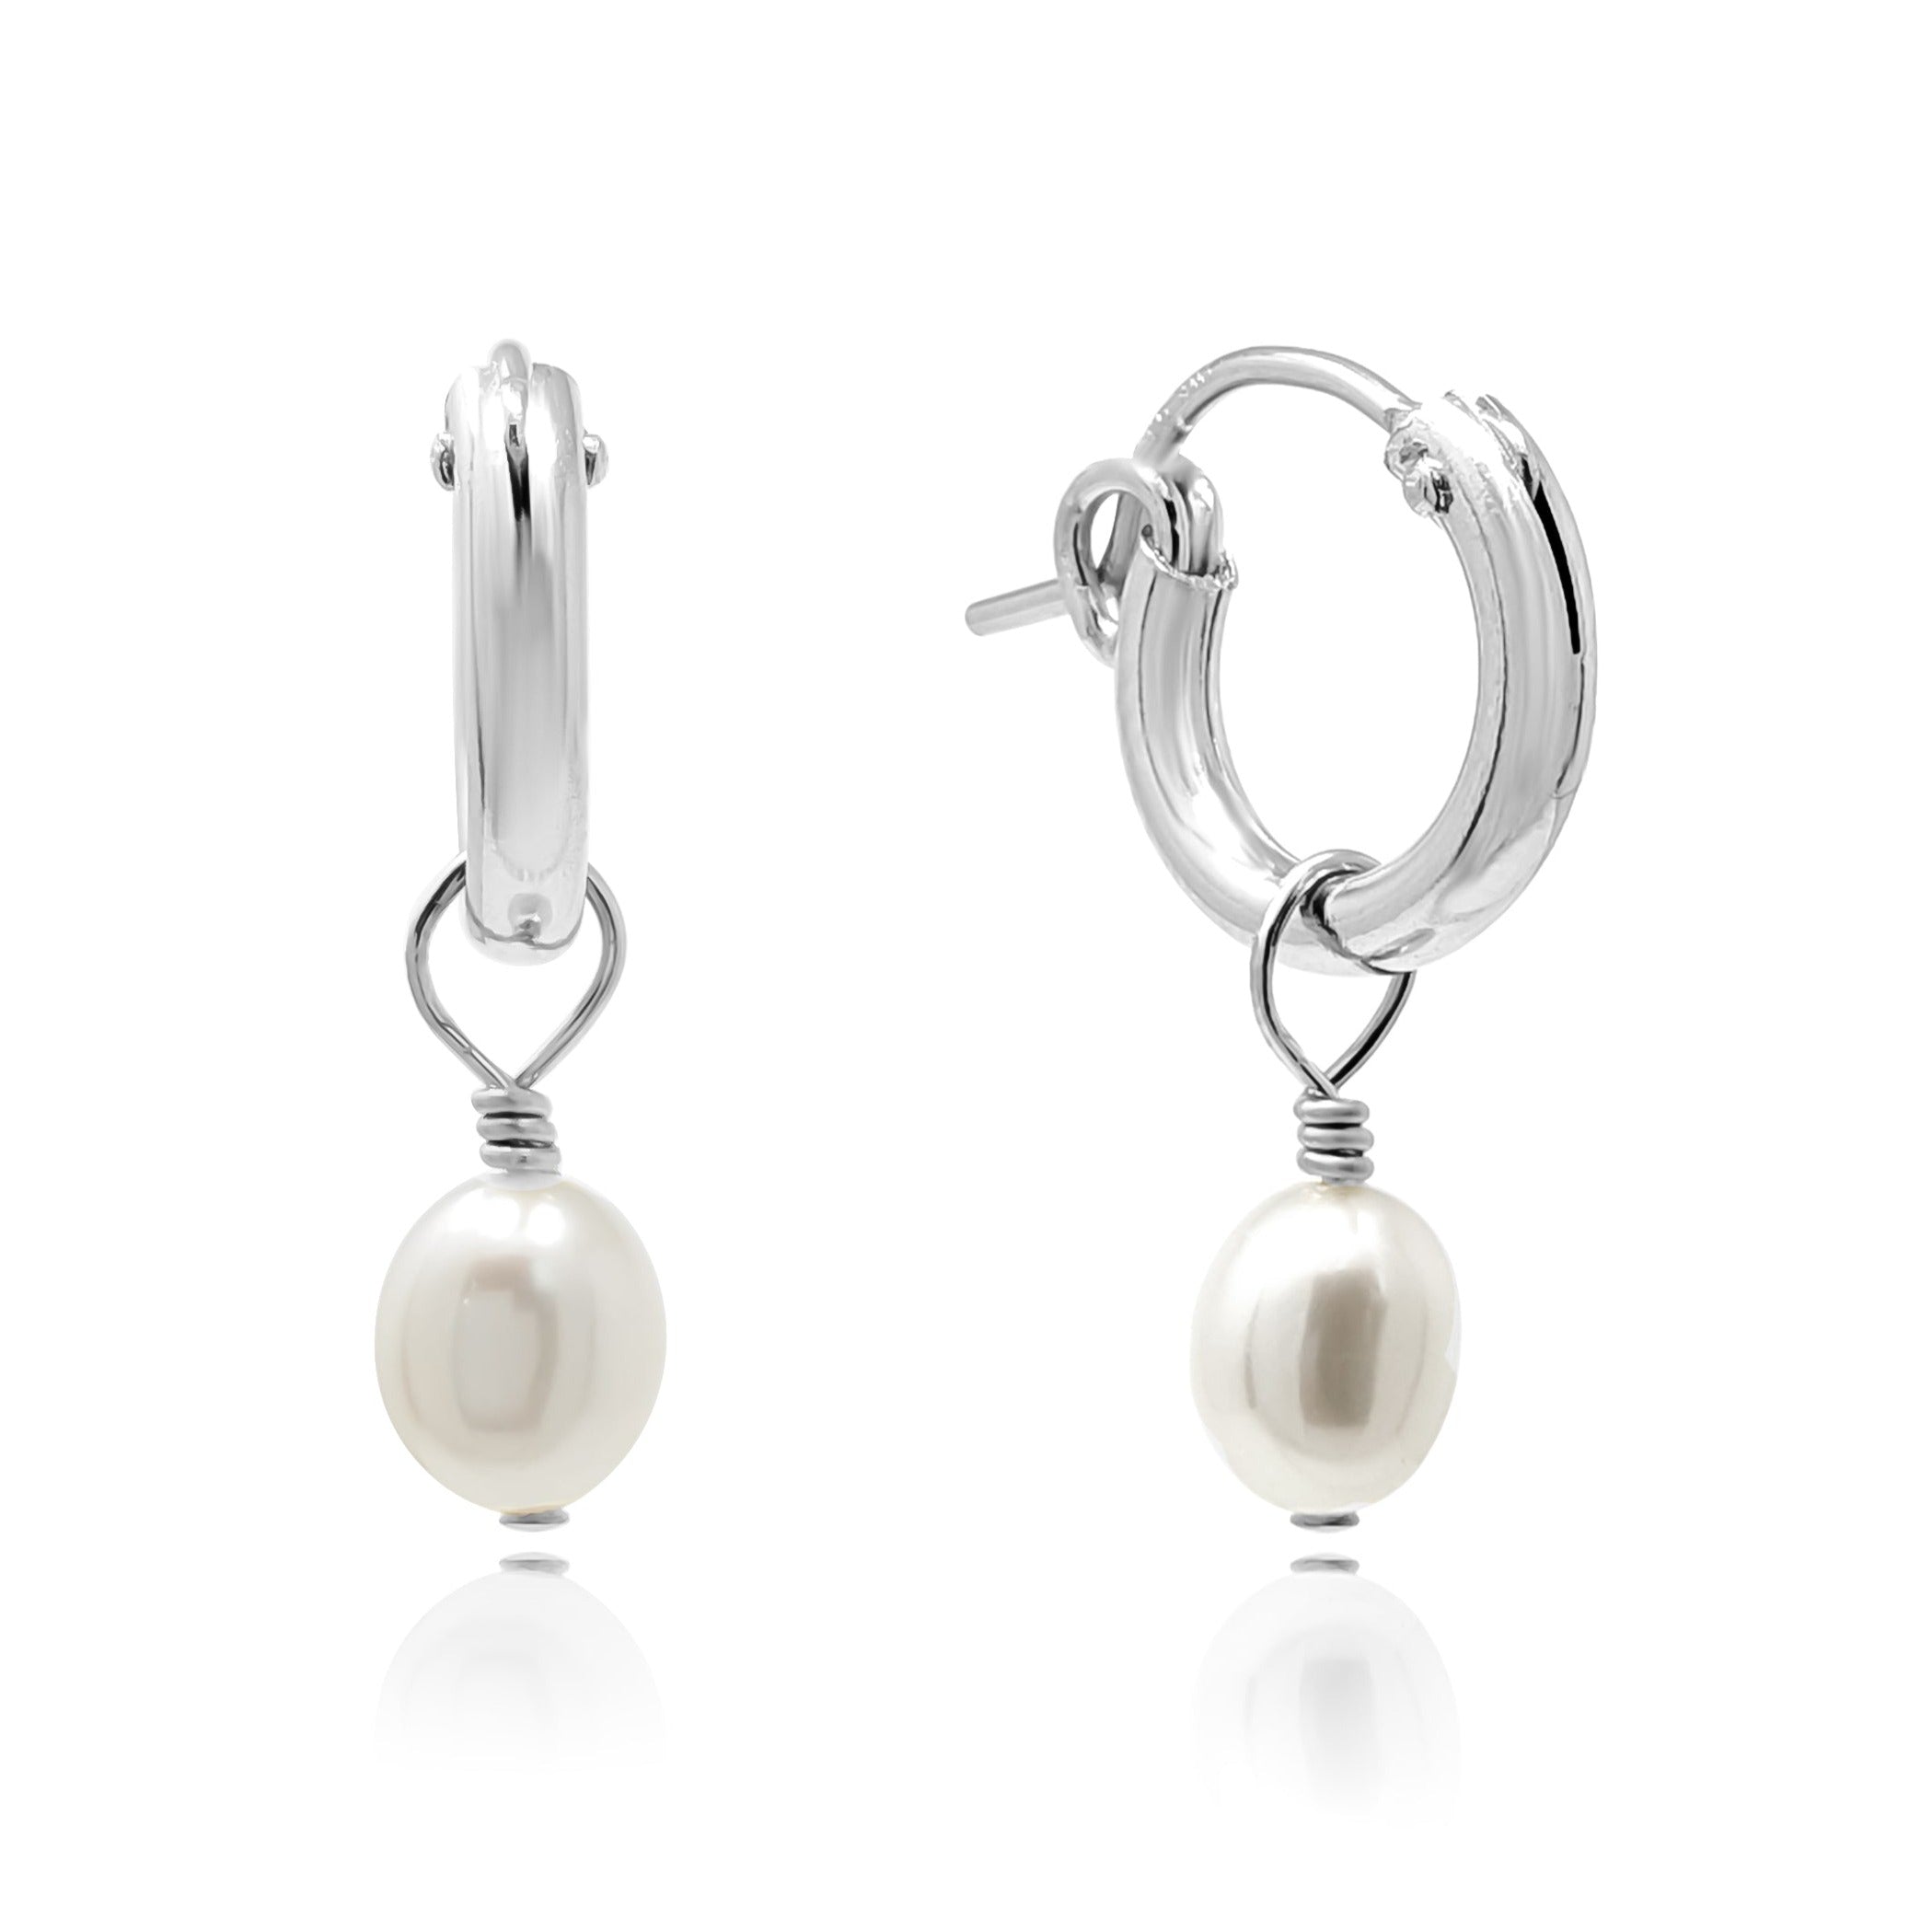 Small silver hoop earrings with freshwater pearls